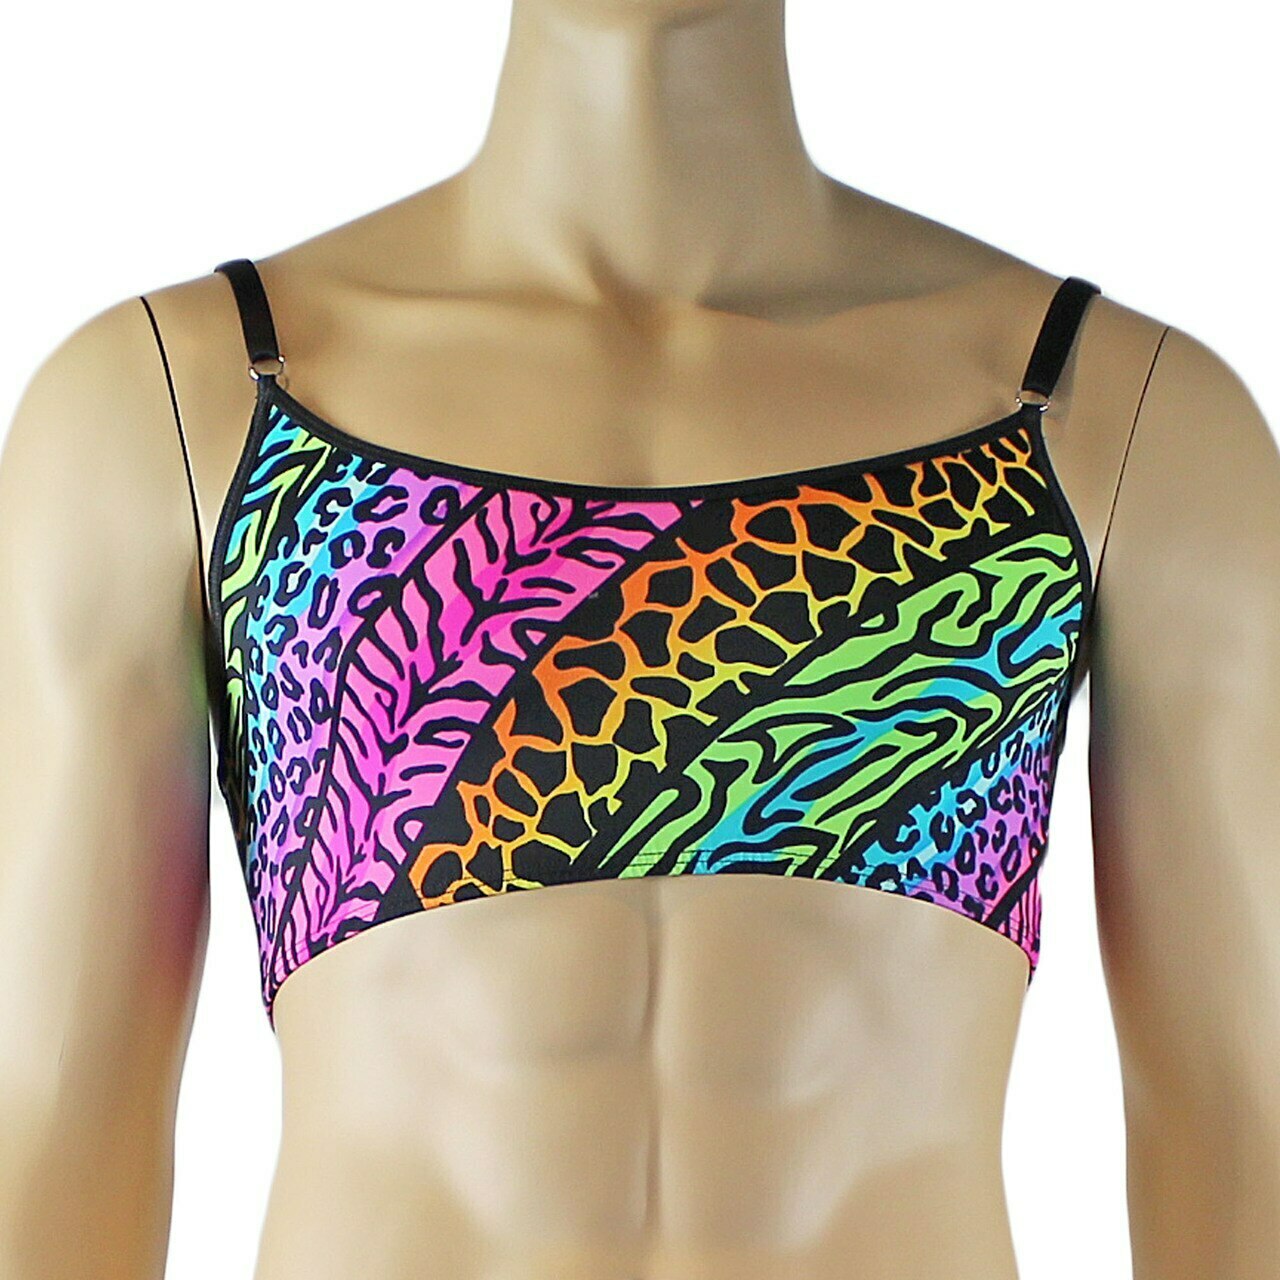 Mens Festival Animal Bra Top and Low Rise Thong Underwear Multi-coloured